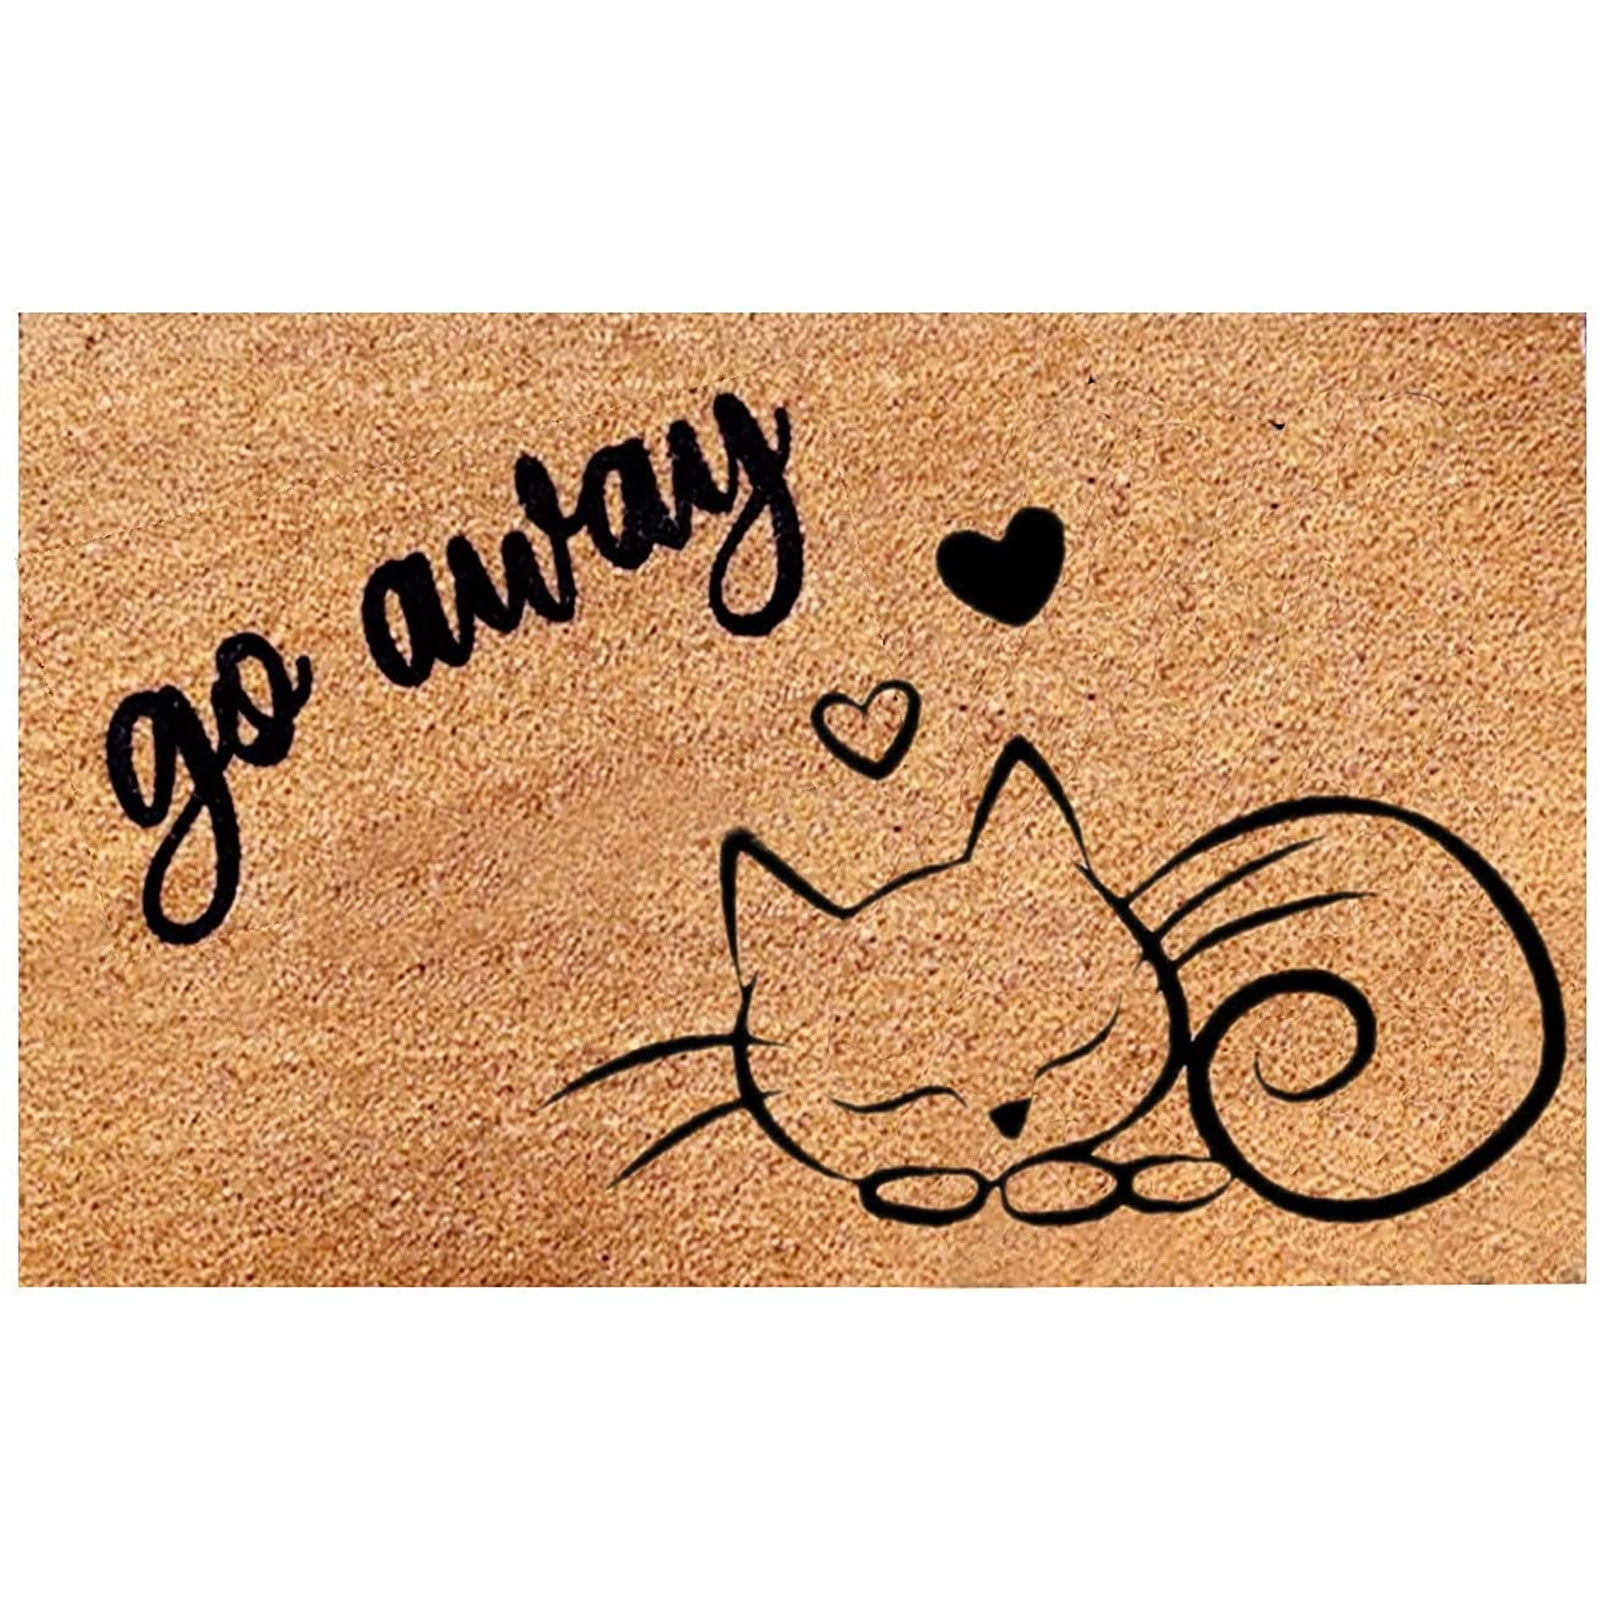 Soft Foam Area Rugs Baby Cat Sleeping Washable Non Slip Kitchen Rugs Bath Rug for Home Decor Indoor/Outdoor 23.6x15.7in 